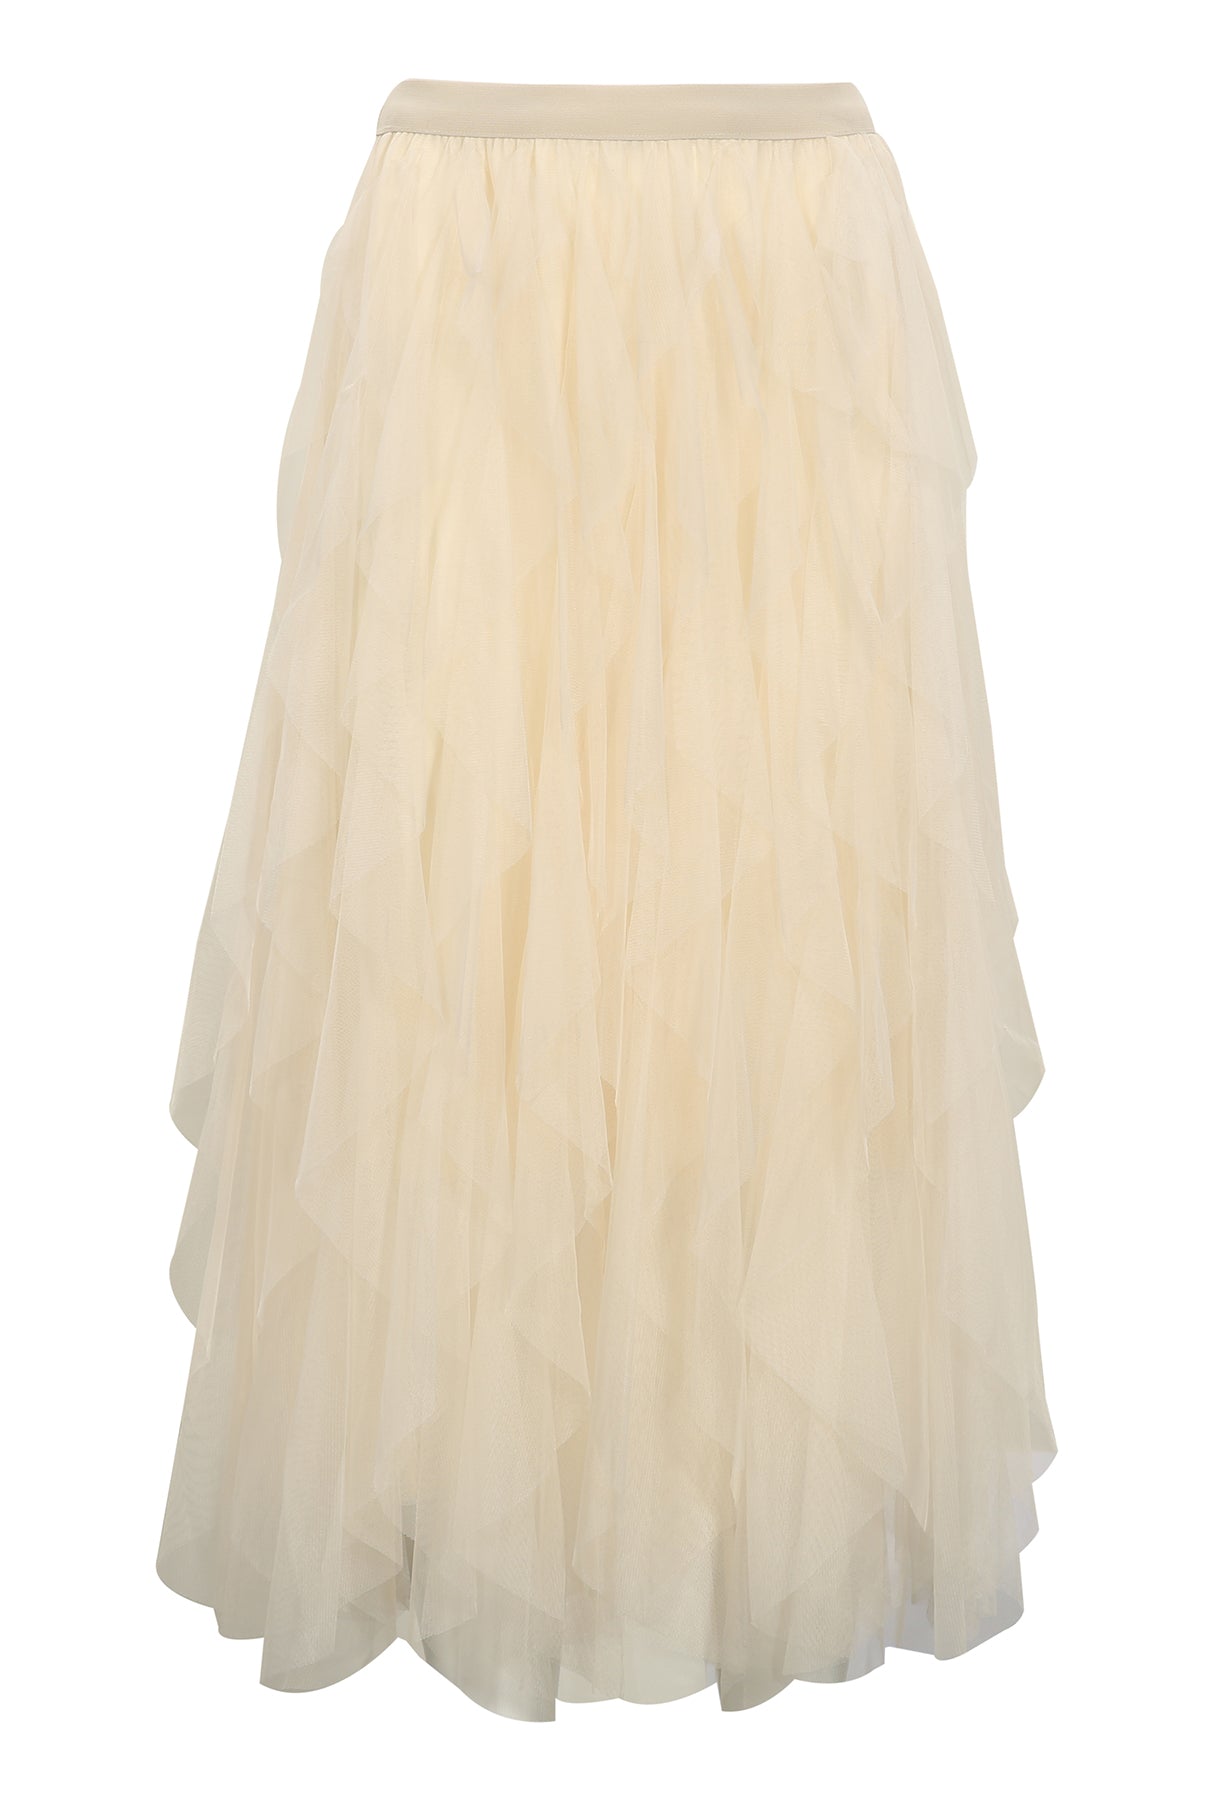 Get Carried Away Skirt - Ivory